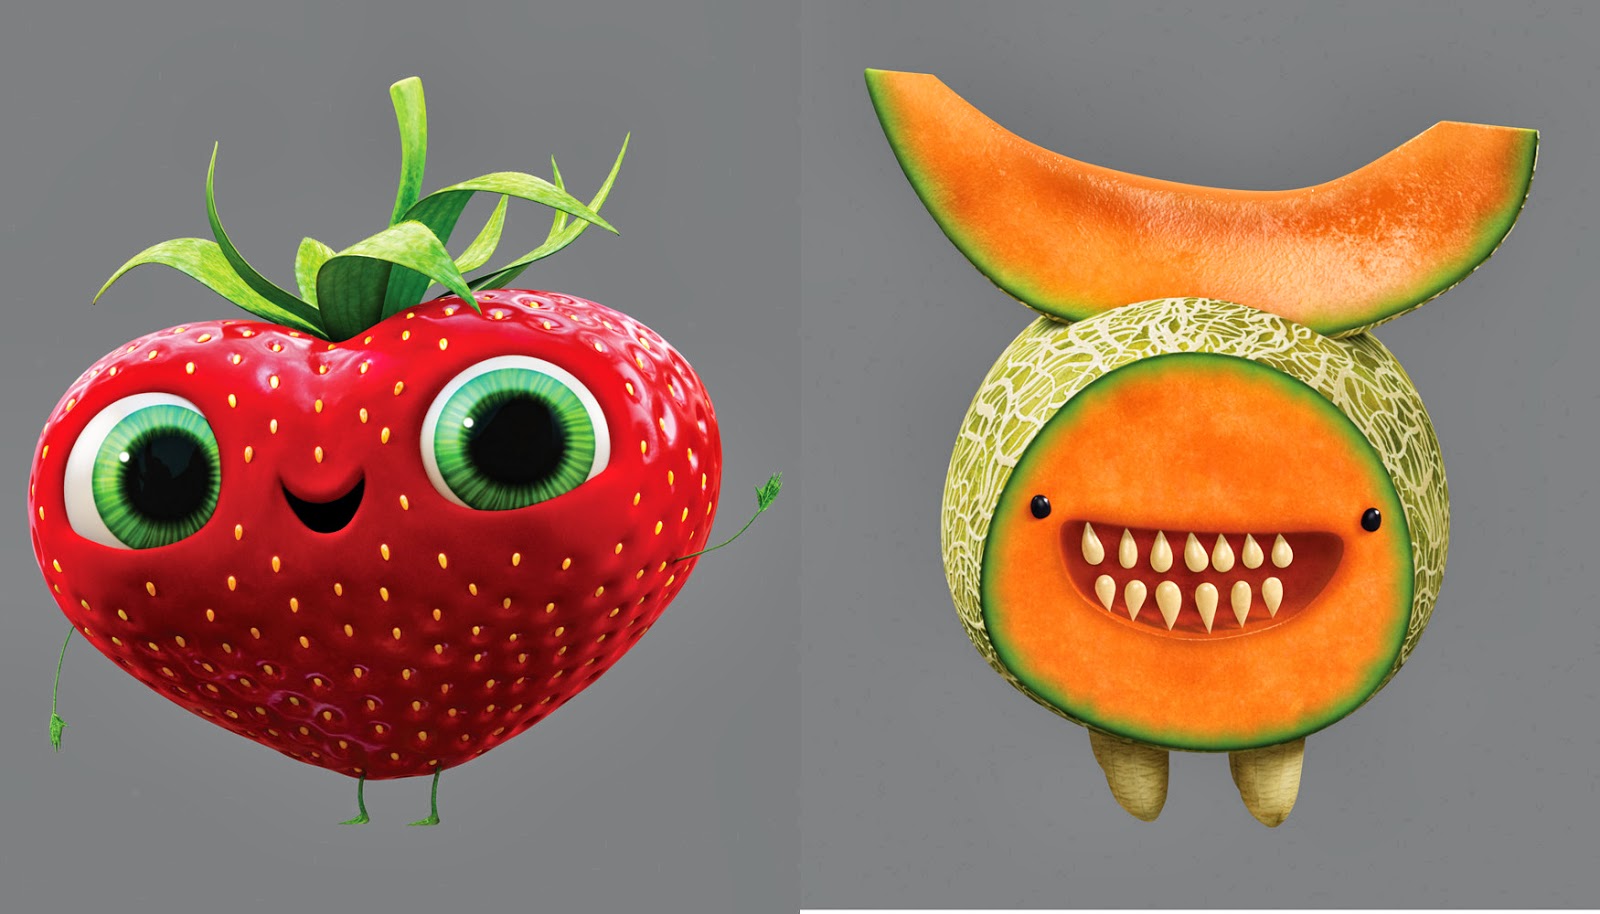 food-animal hybrids - foodimals in "Cloudy with a Chance of Meatballs ...